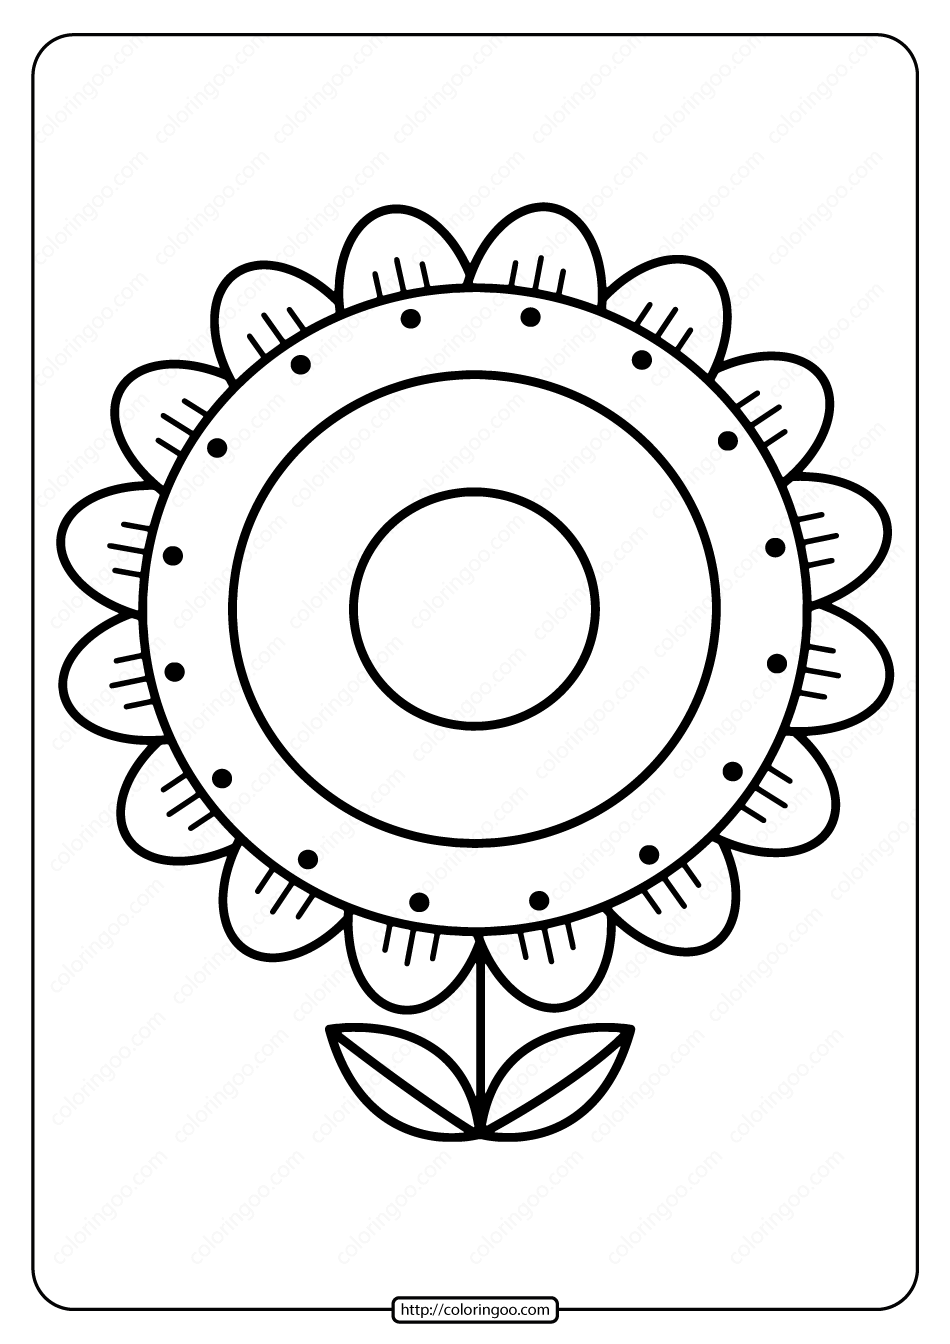 printable sunflower pdf coloring page